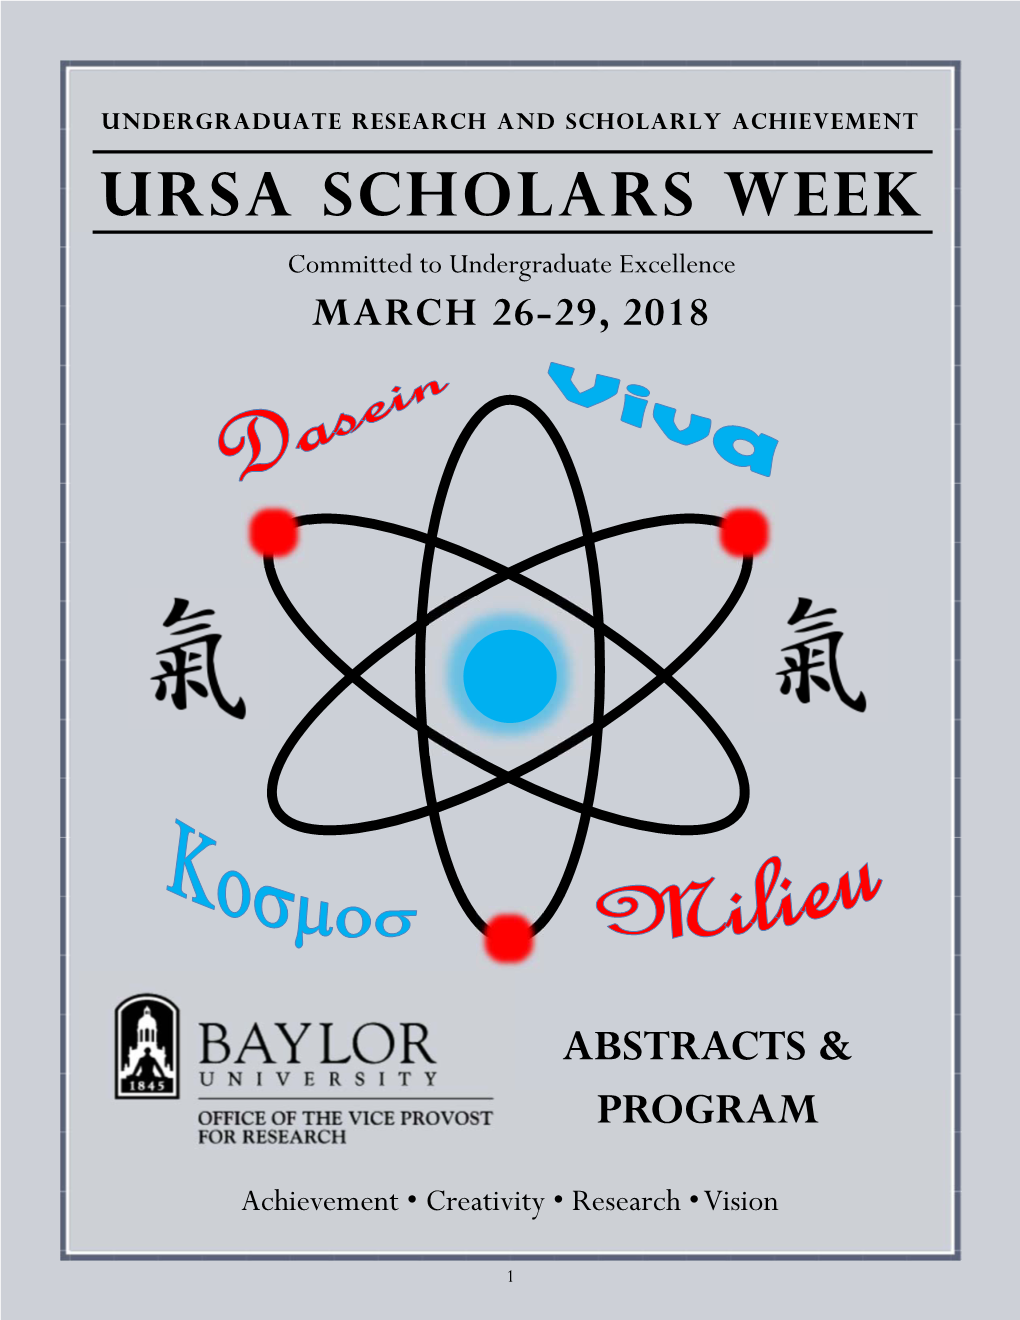 URSA SCHOLARS WEEK Committed to Undergraduate Excellence MARCH 26-29, 2018